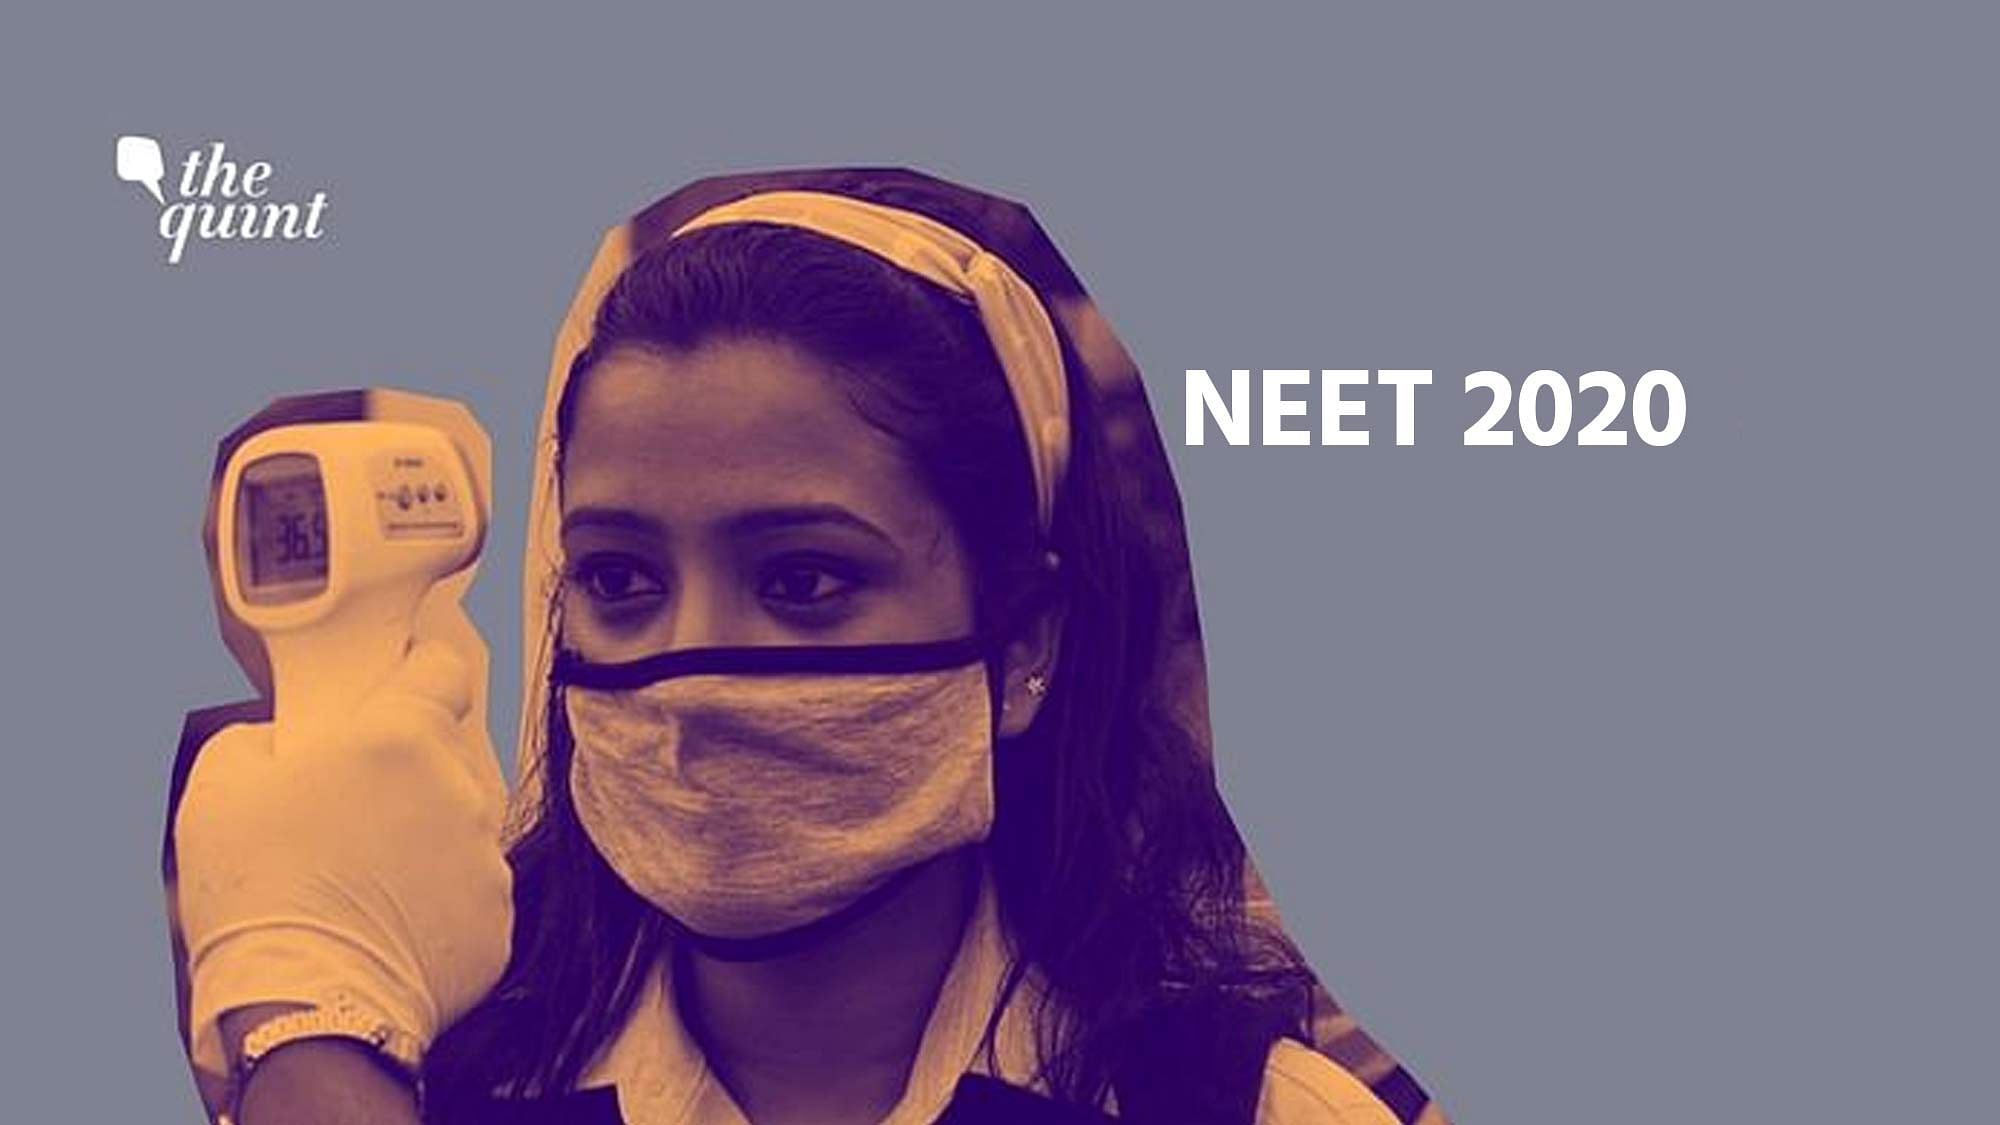 Students who appeared for NEET 2020 can view their results on the official NTA website: <a href="http://ntaneet.nic.in/">ntaneet.nic.in</a>.